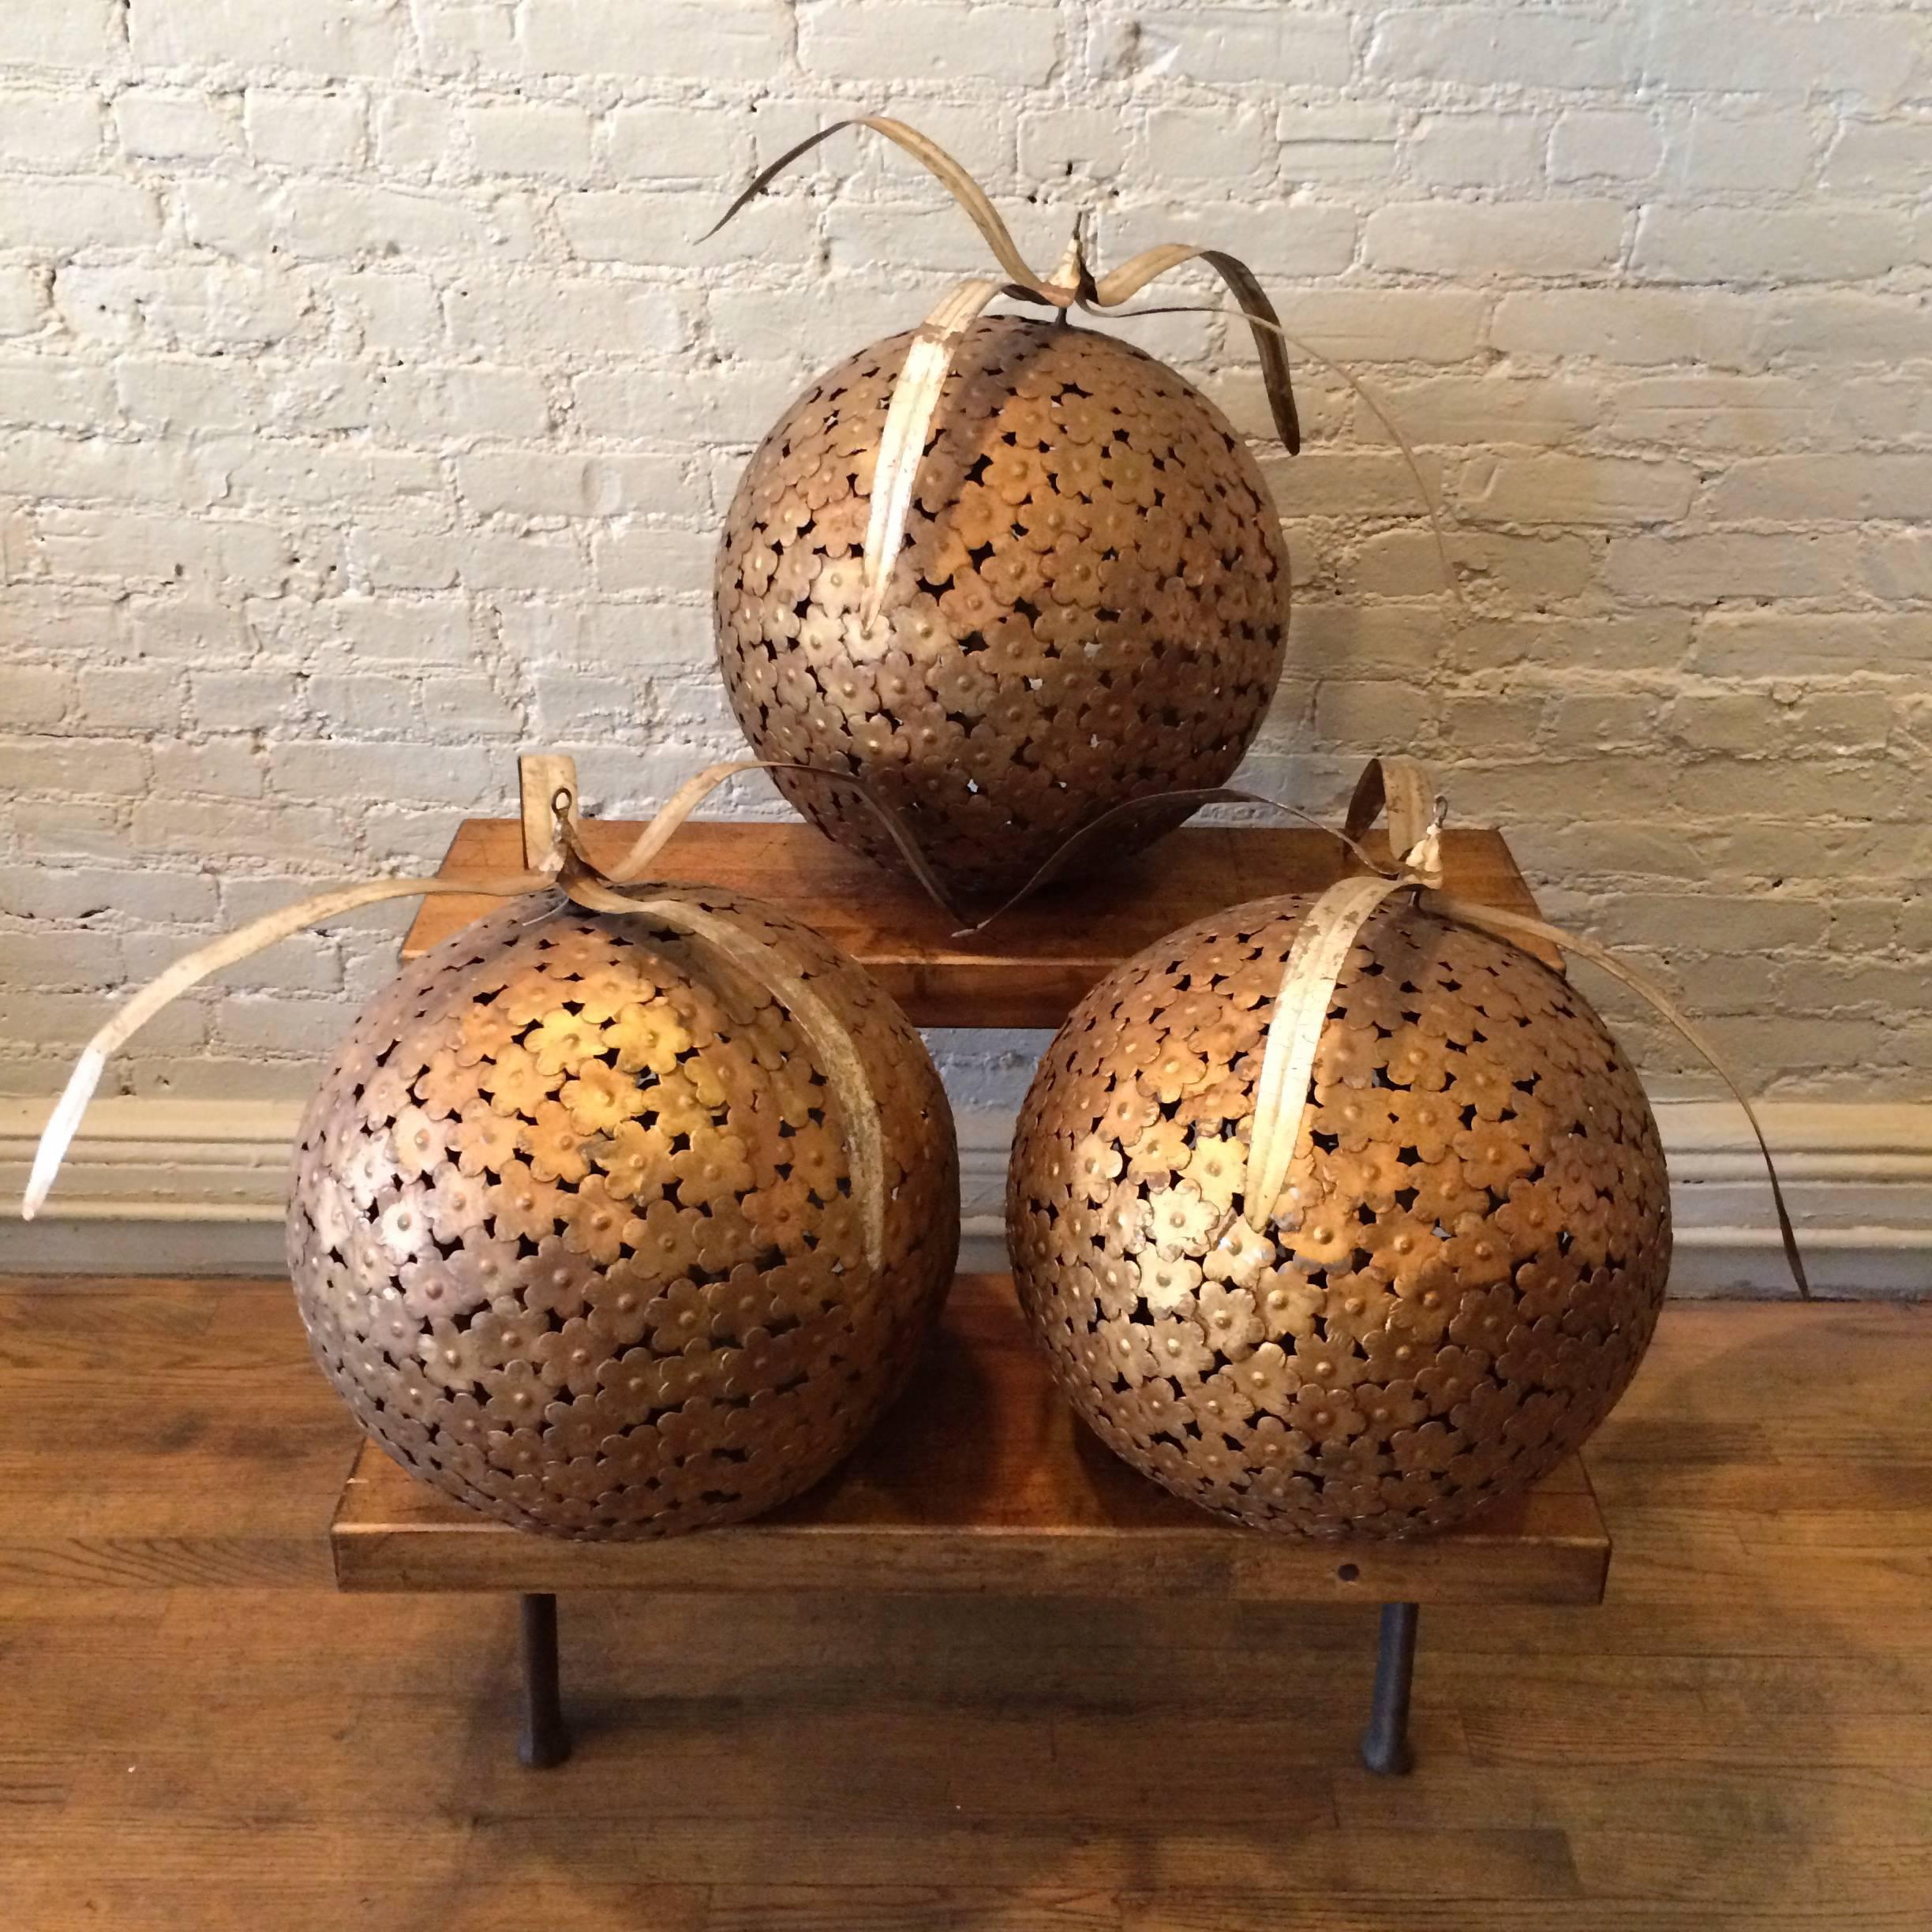 Set of three, large, painted steel and decorative ball ornaments from Macy’s Department store display, circa 1960s.